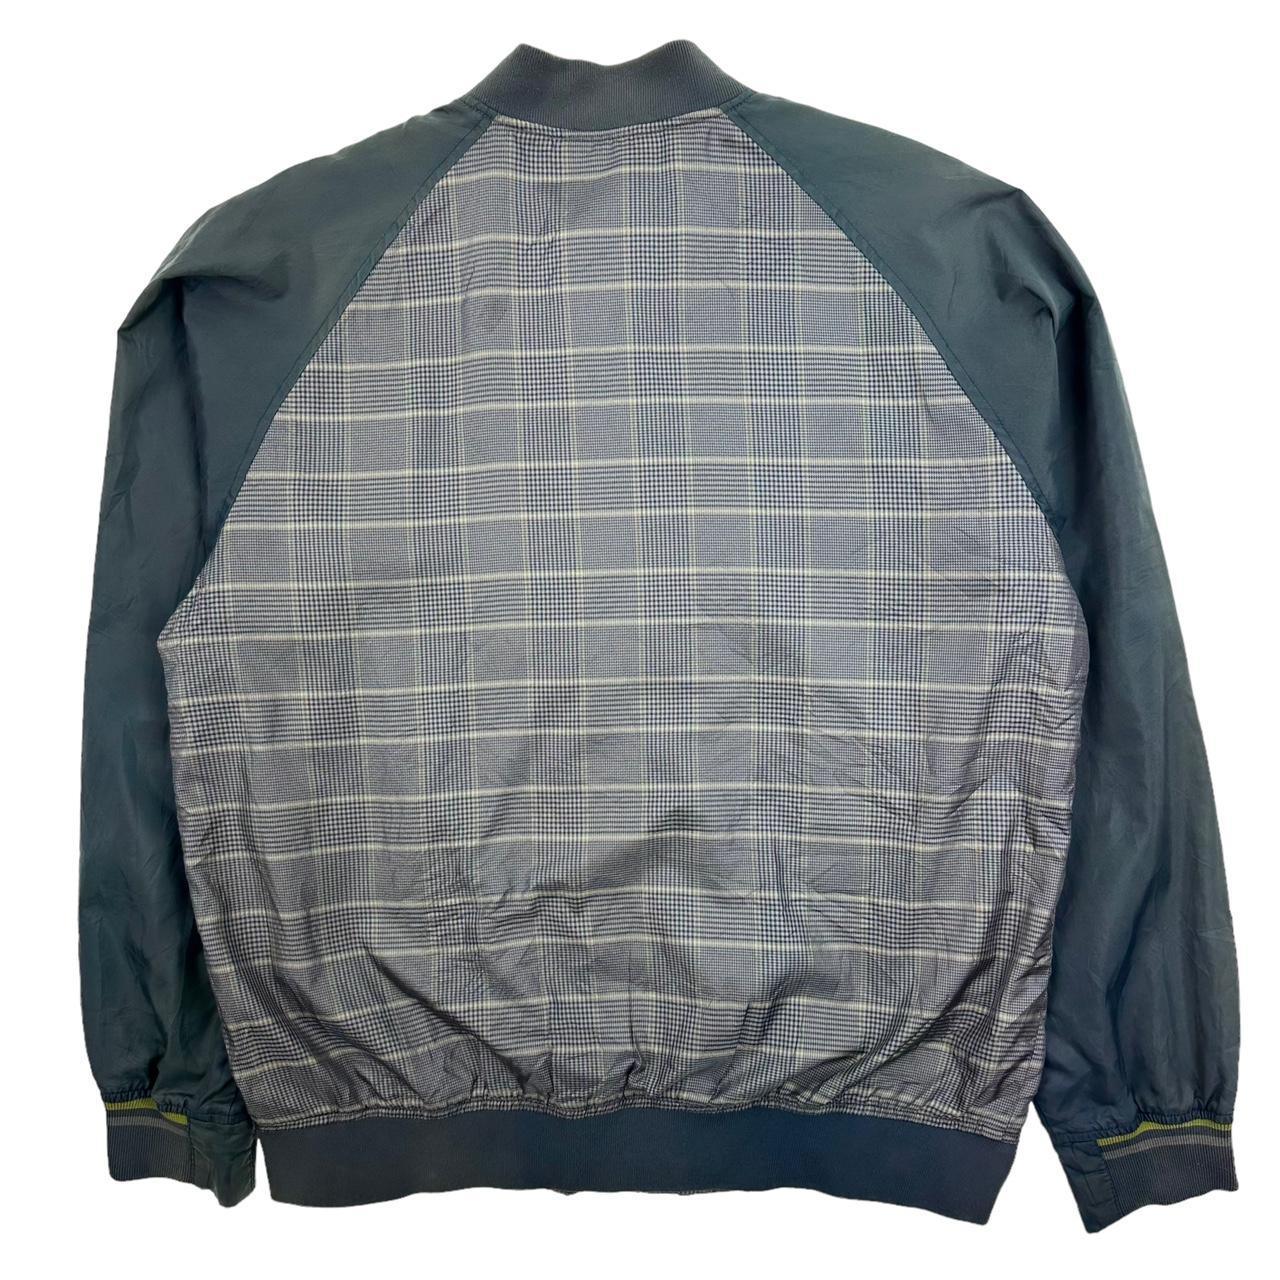 Vintage Stussy Checked Jacket Size M - Known Source